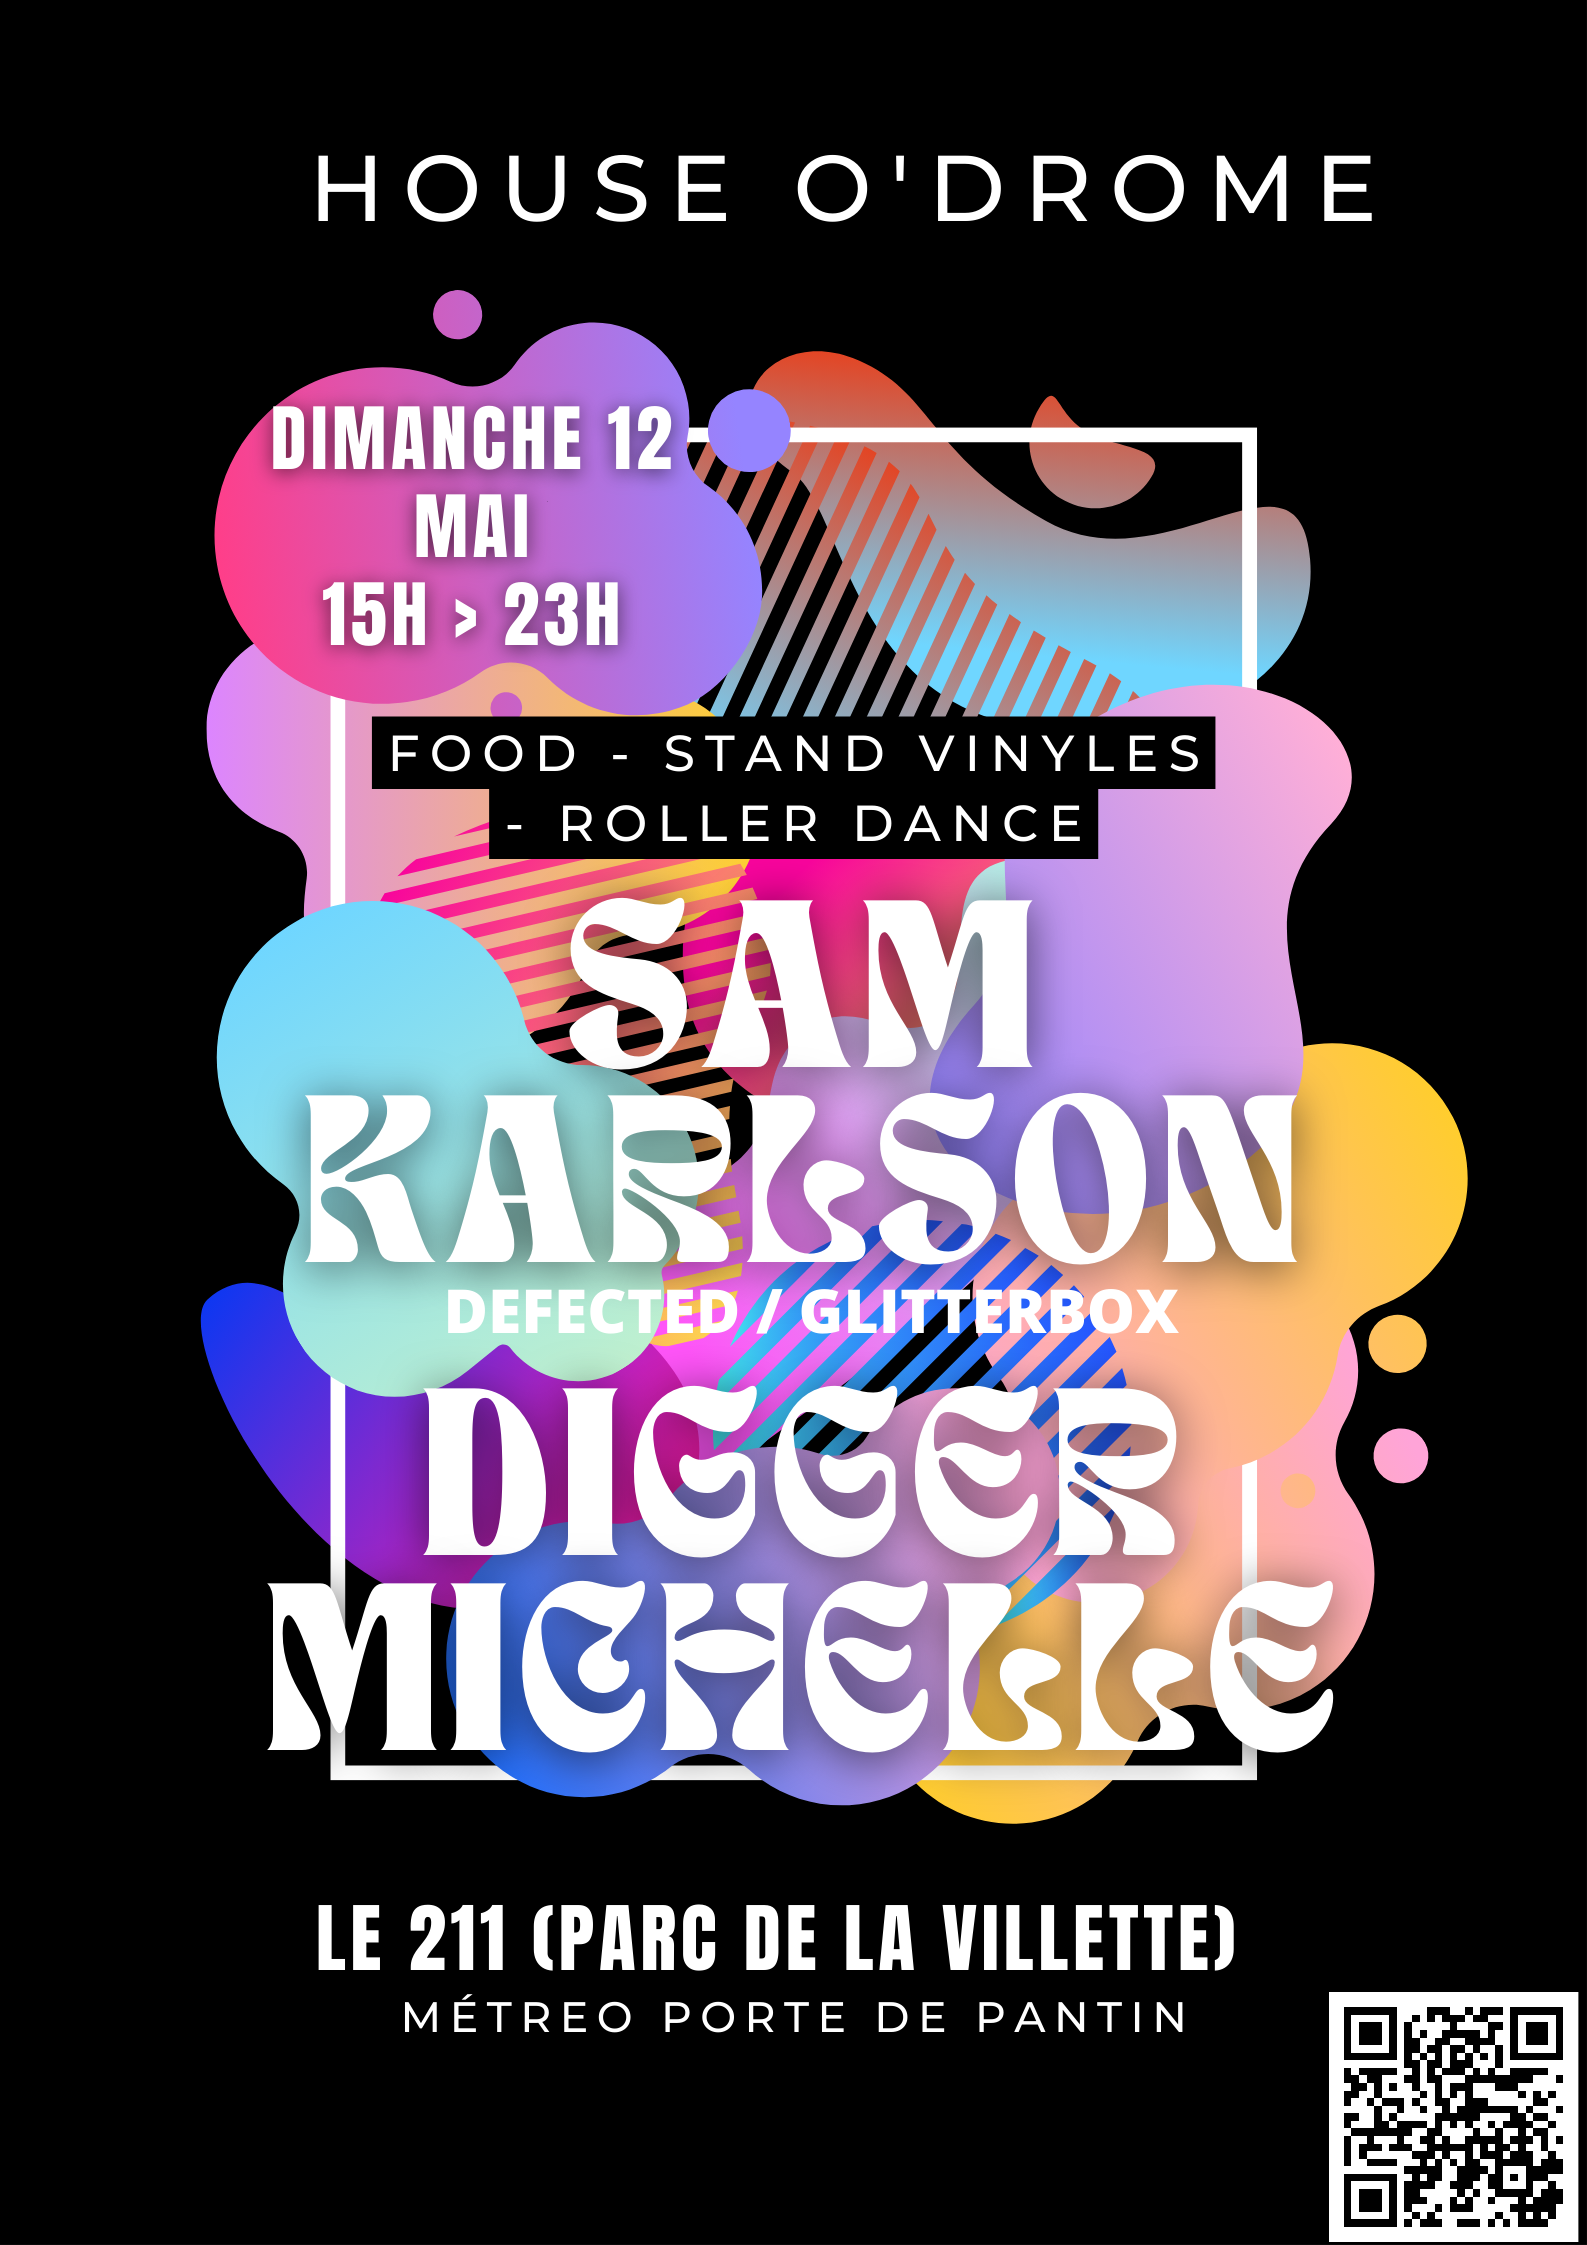 House O'Drome: SAM KARLSON (DEFECTED/GLITTERBOX), DIGGER MICHELLE & MORE - Página frontal